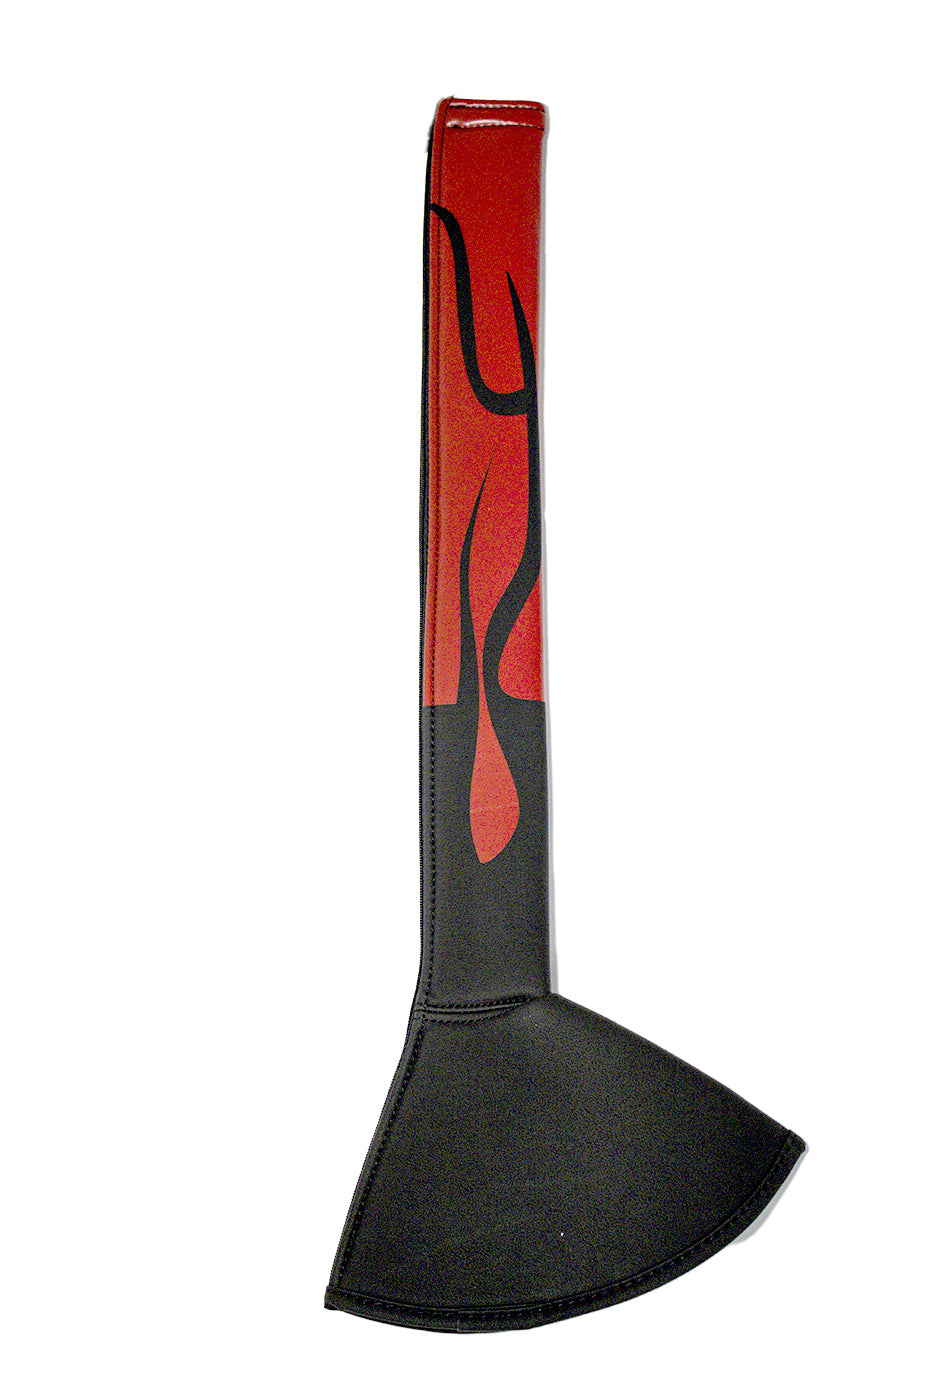 Semi Truck 30" Red Flame Vinyl Gear Shift Cover